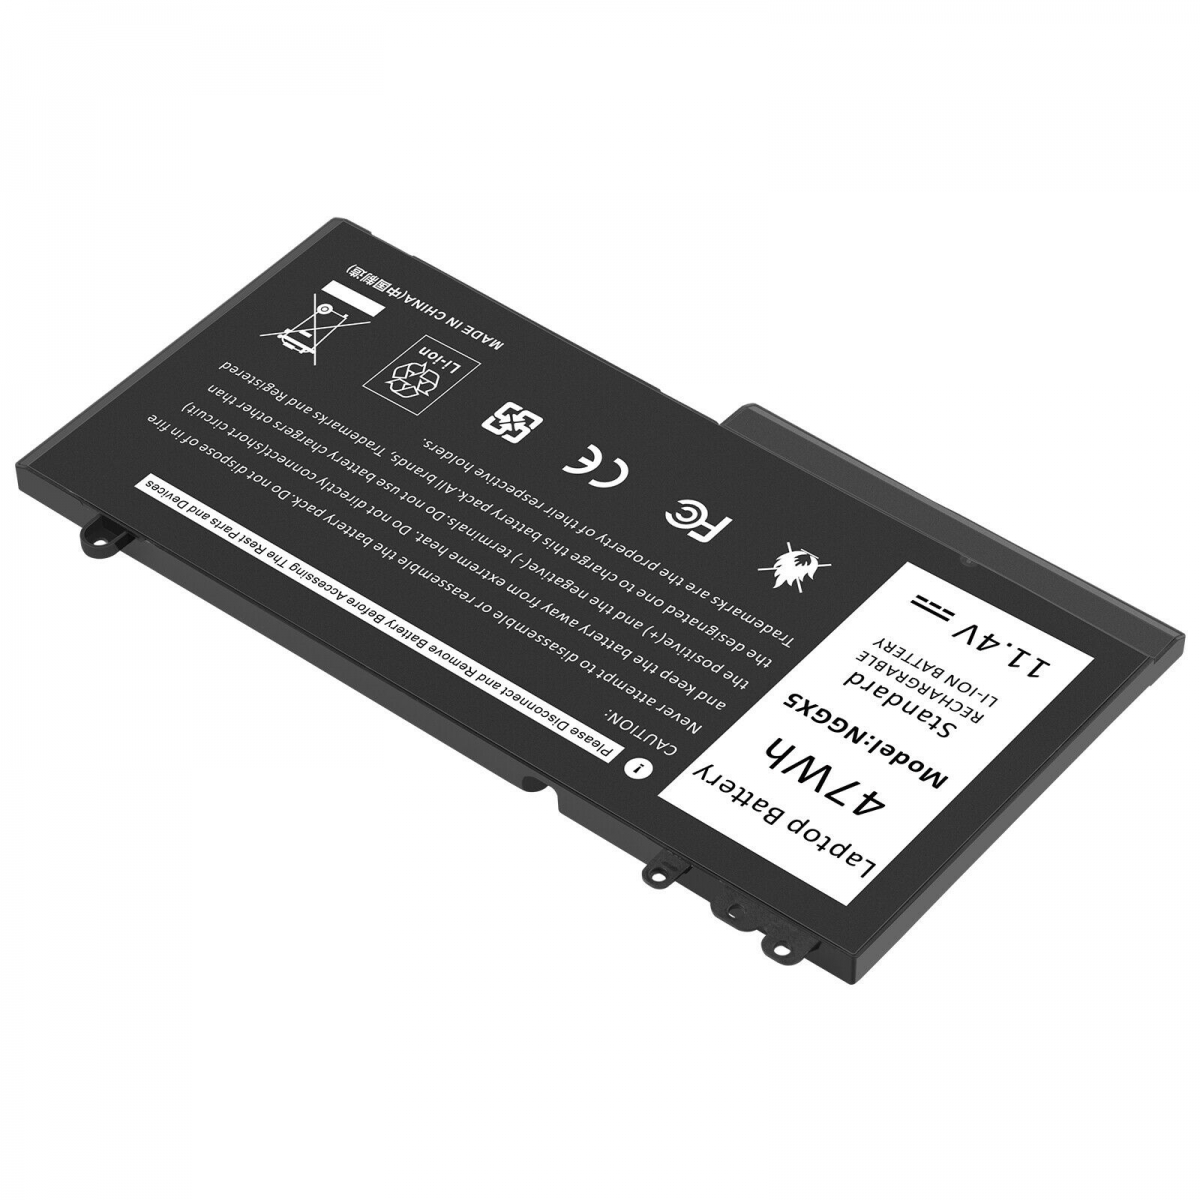 NGGX5 Battery-CPY,Laptop battery, Laptop adapter, Laptop charger, Dell battery, Apple battery, HP battery